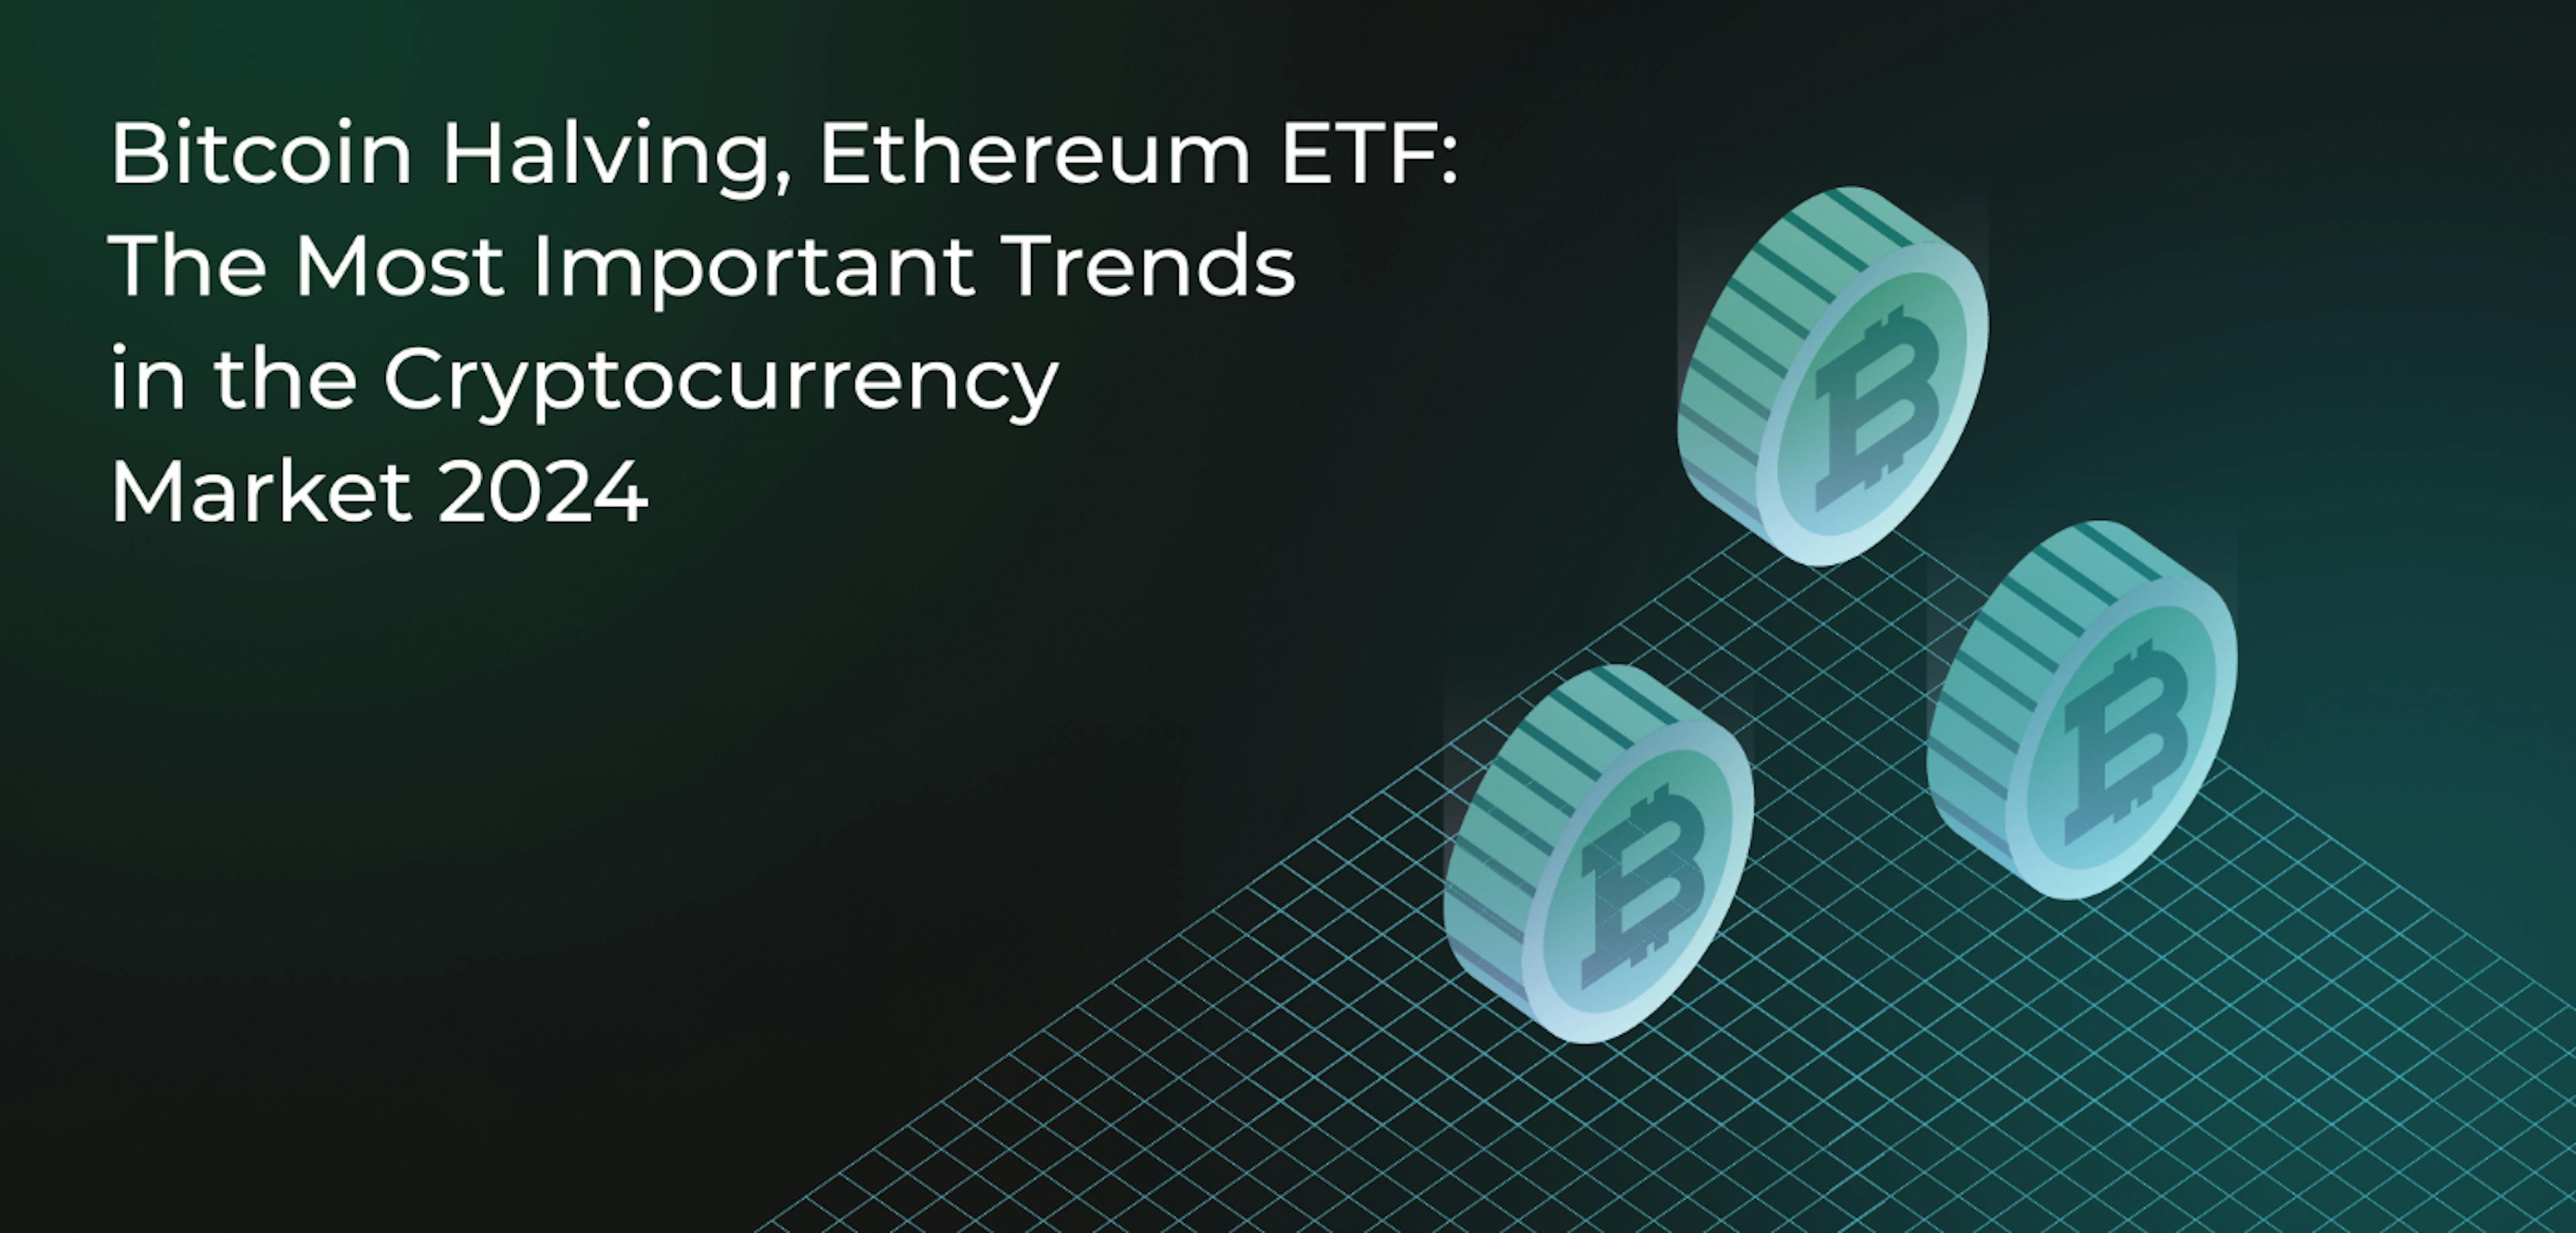 featured image - Bitcoin Halving, Ethereum ETF: The Most Important Trends in the Cryptocurrency Market 2024